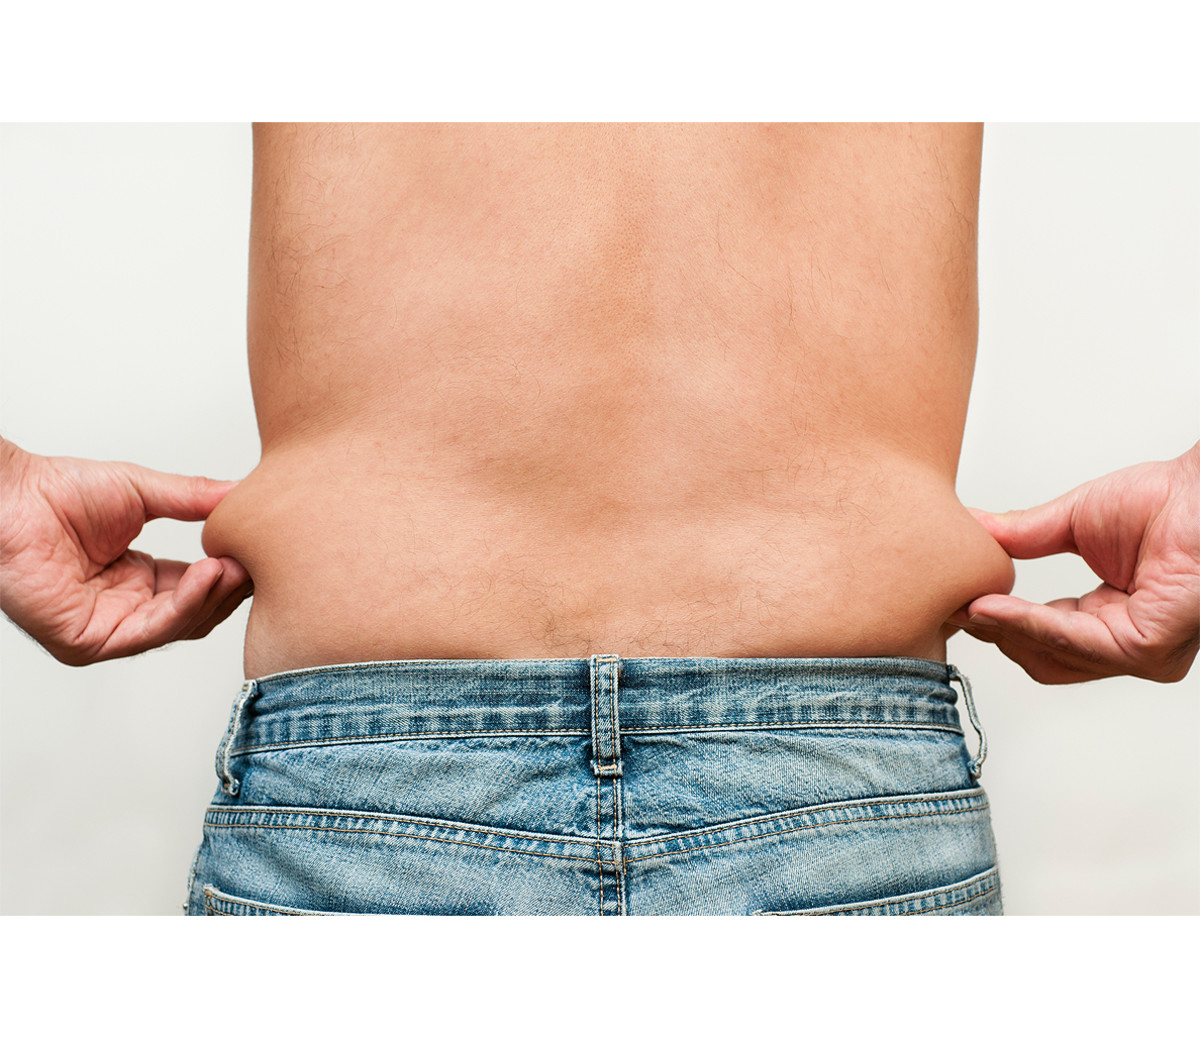 Visceral Fat: What It Is and How to Get Rid of It